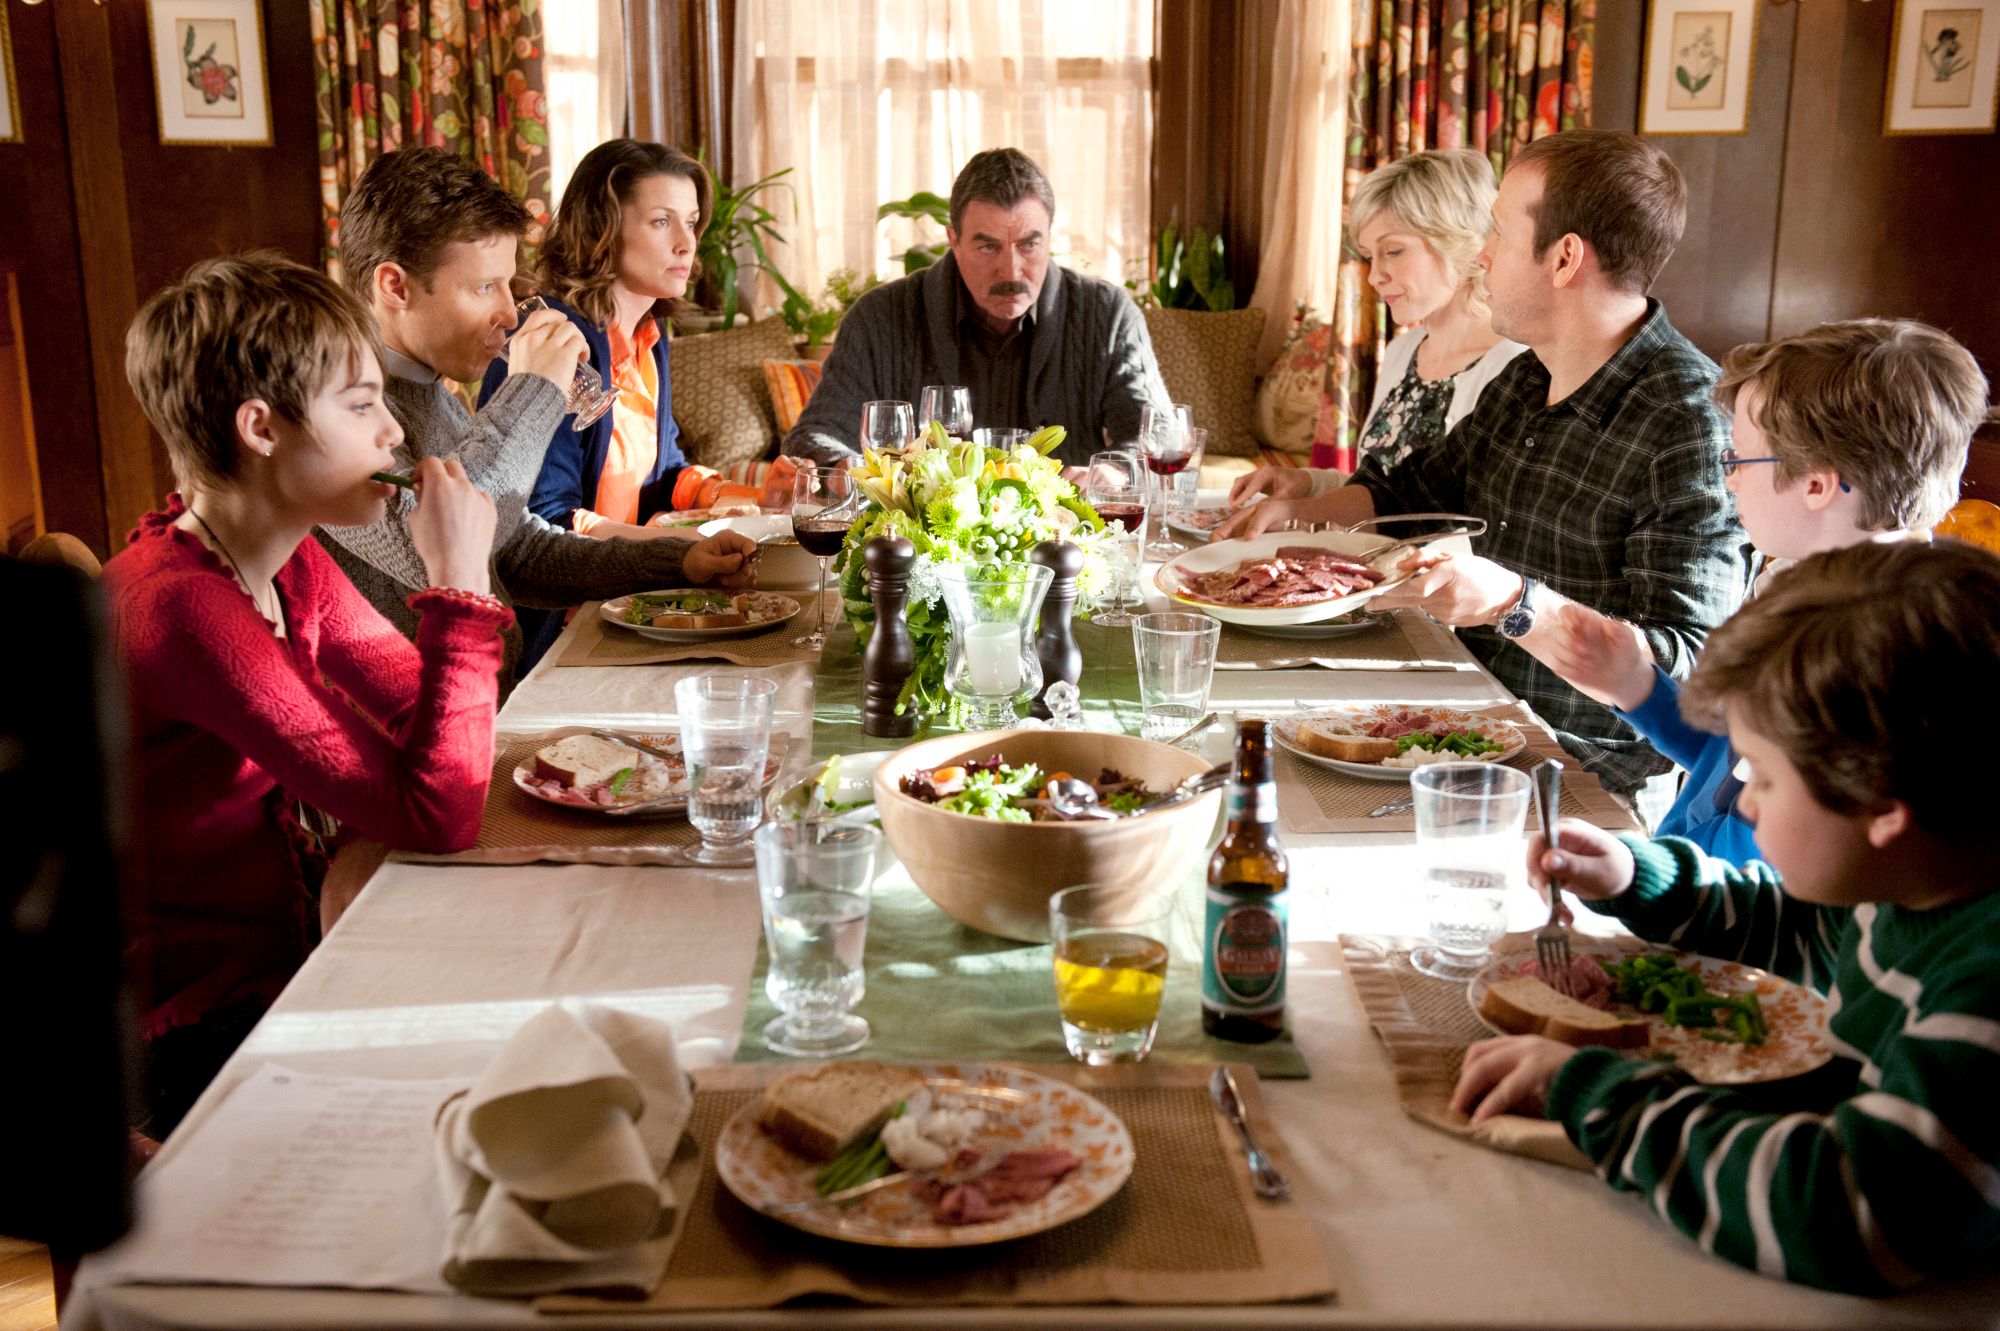 The show's cast: Nicky (Sami Gayle), Jamie (Will Estes), Erin (Bridget Moynahan), Frank (Tom Selleck), Linda (Amy Carlson), Danny (Donnie Wahlberg), Jack (Tony Terraciano) and Sean (Andrew Terraciano) during family dinner, on "Blue Bloods," Friday, March 9. | Source: Getty Images